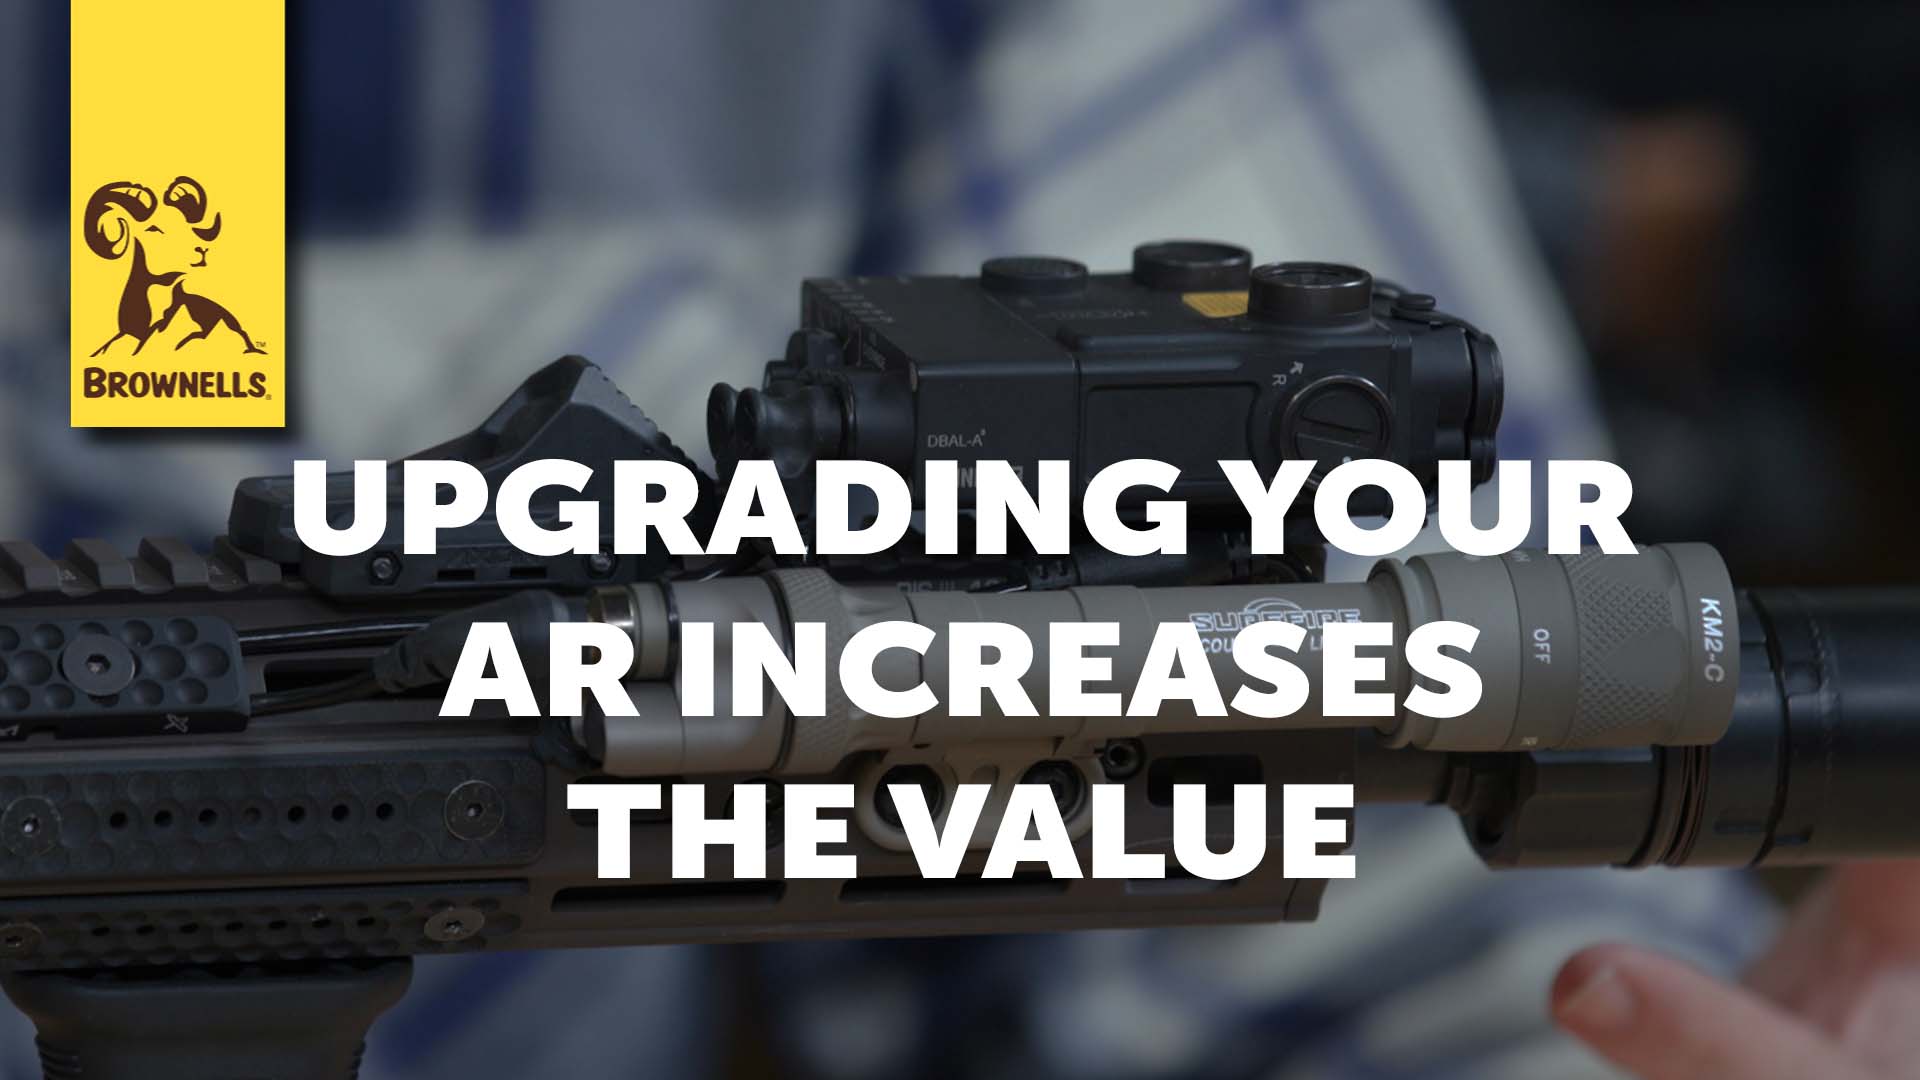 0204-23 SmythBuster - Upgrading Your AR Increases the Value_Thumb